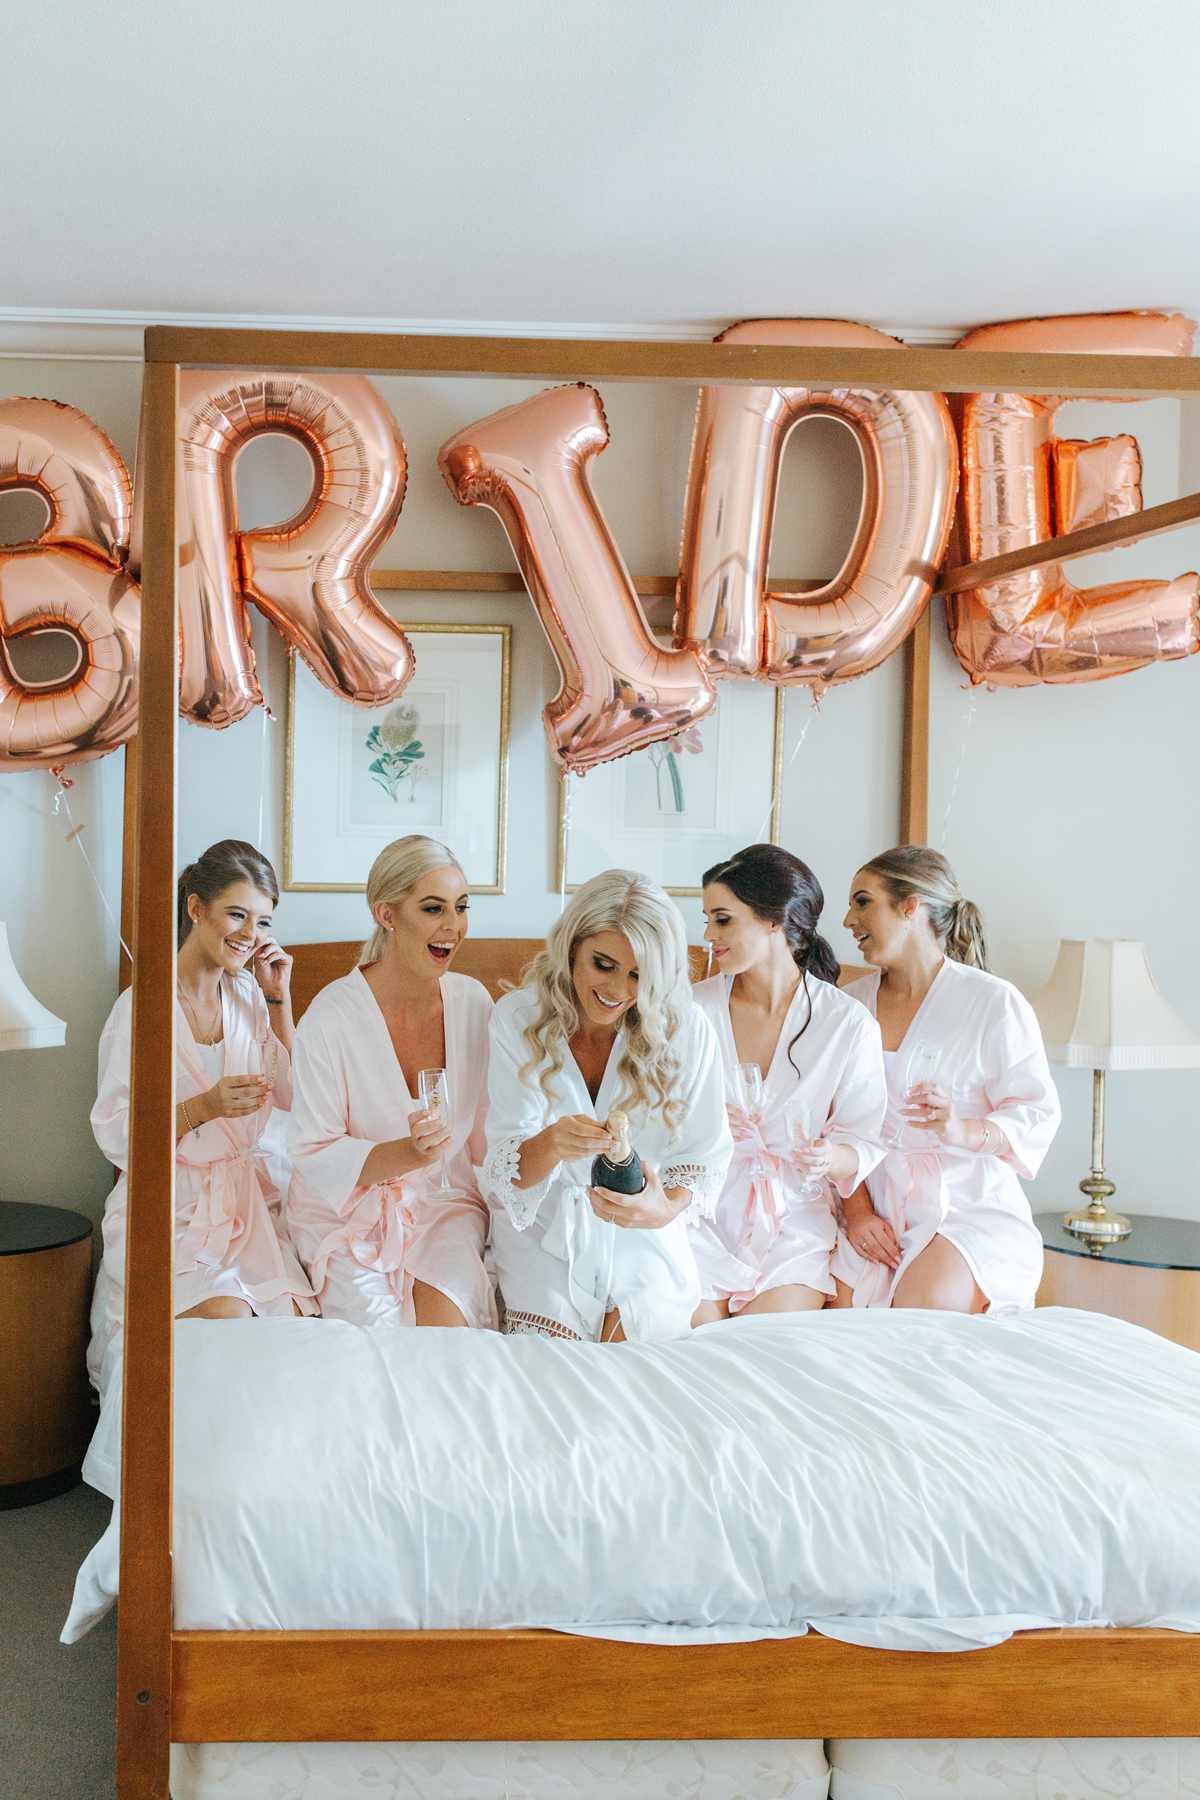 rose gold wedding ideas wedding balloons spelling out bride